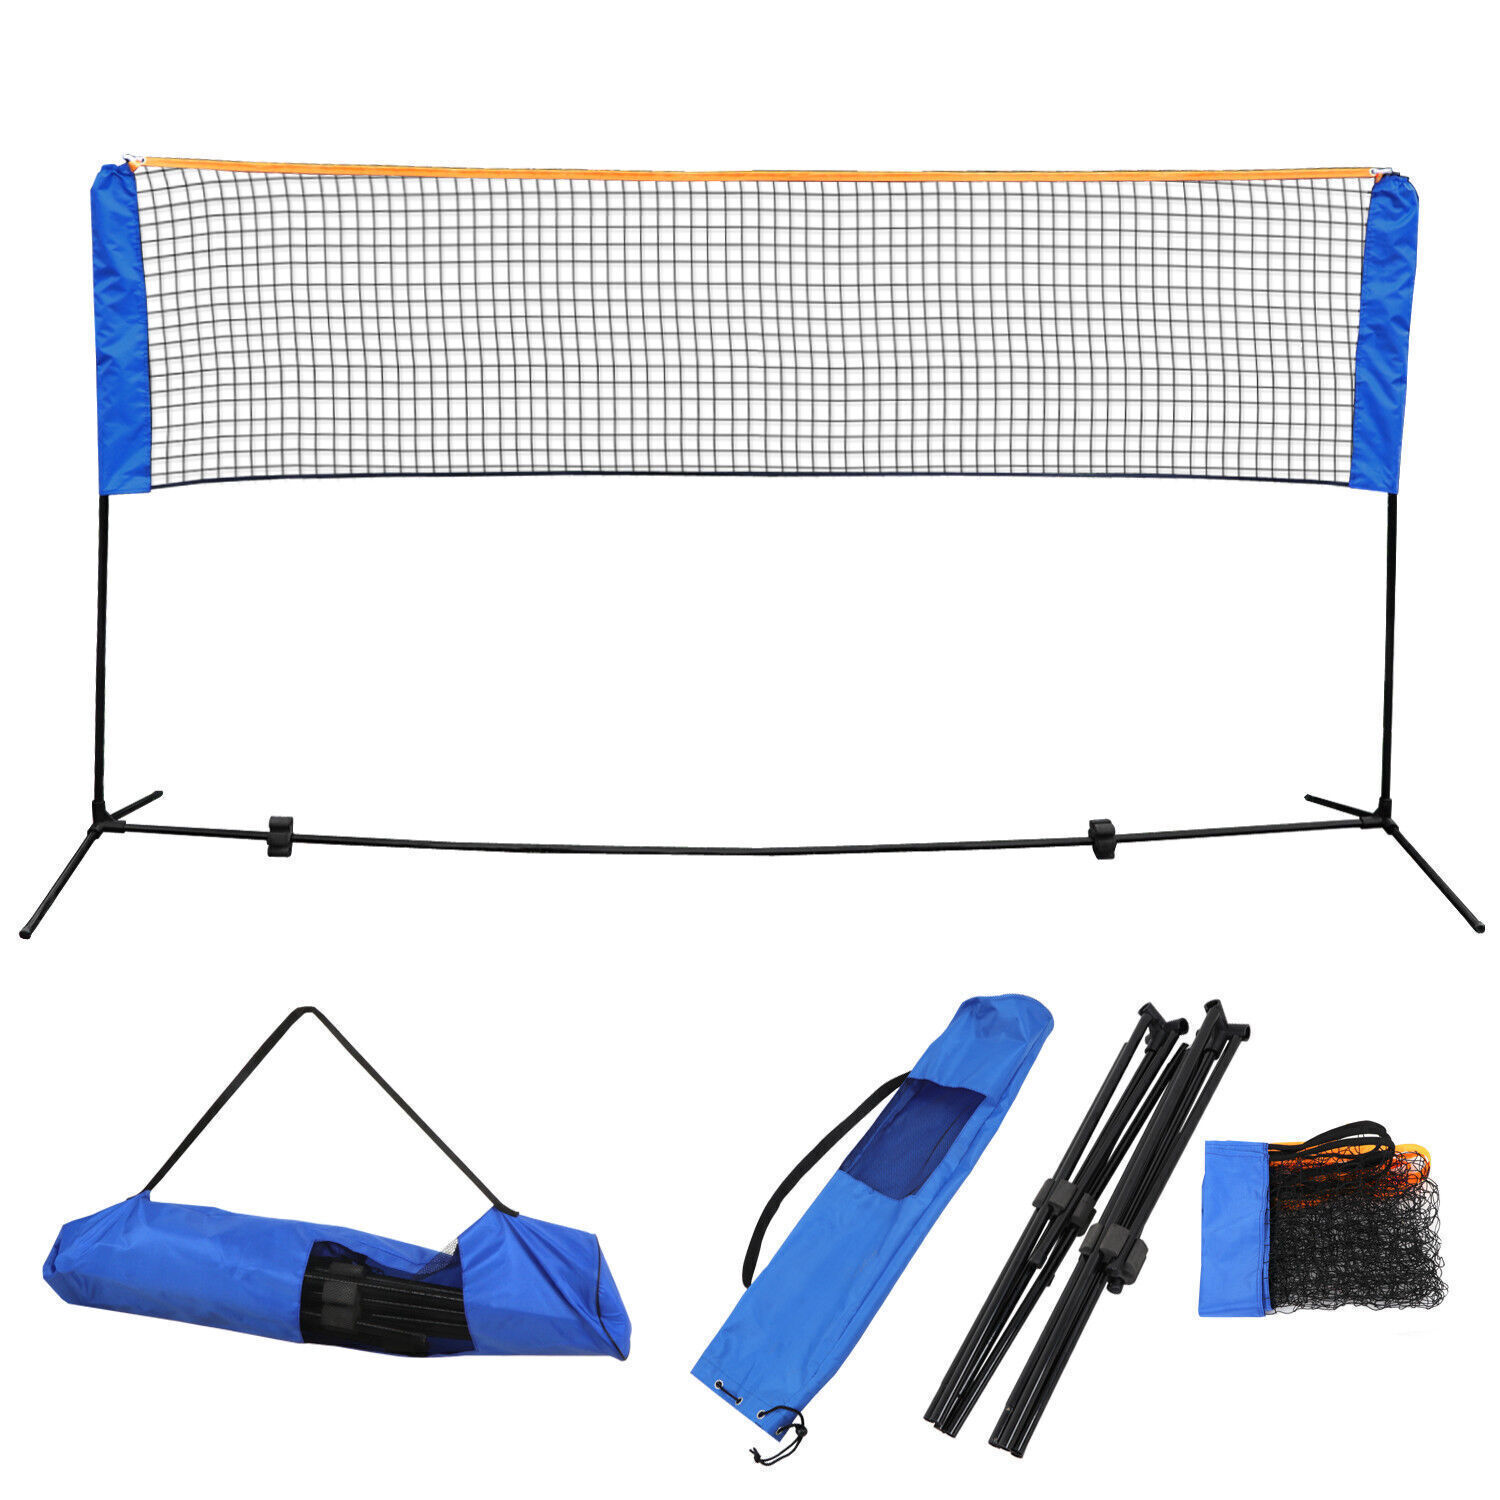 Compact Volleyball Badminton Beach Volleyball Tennis Training Net W/ Carry Bag